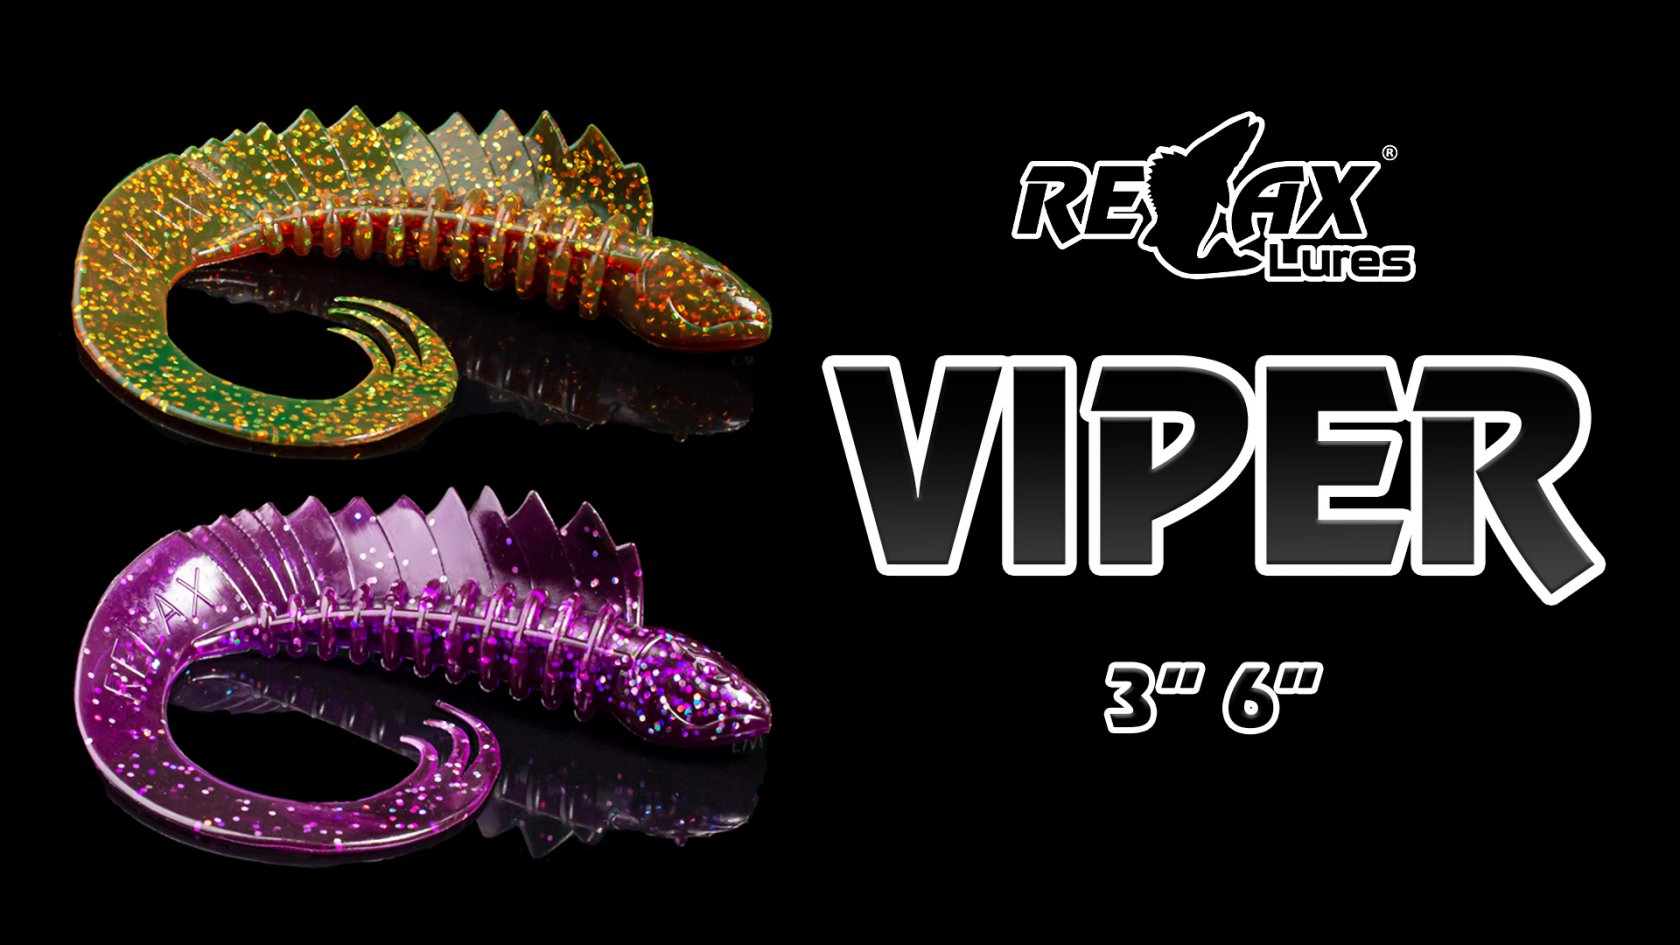 DRAGON LURE - VIPER LURE - BEST PIKE AND MUSKIE LURE - RELAX LURES